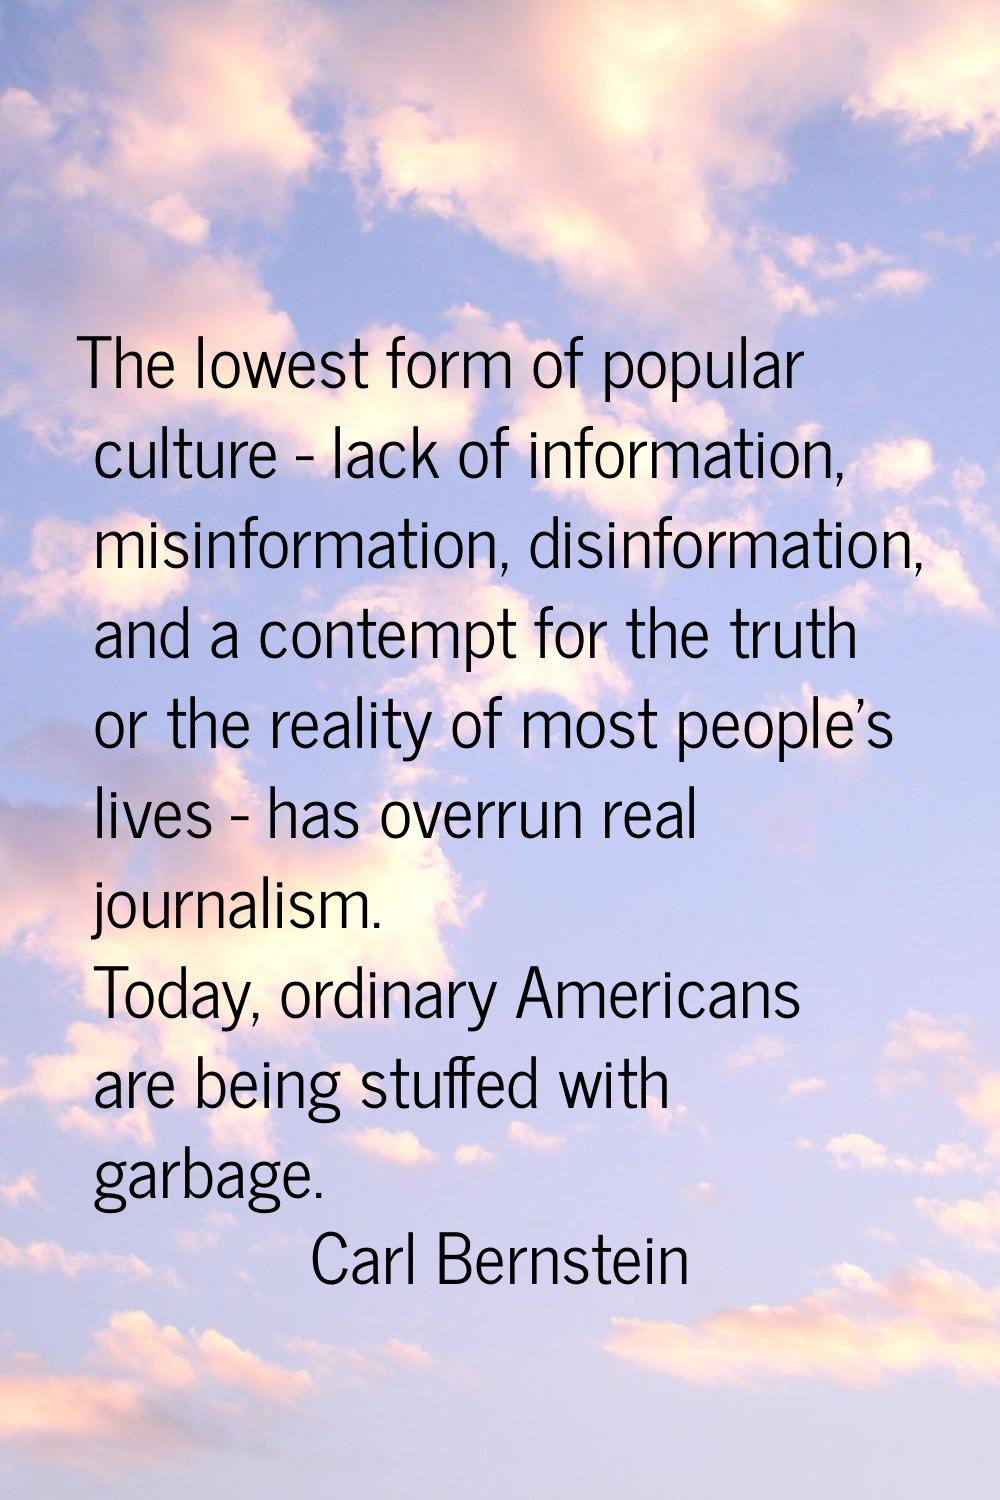 The lowest form of popular culture - lack of information, misinformation, disinformation, and a con